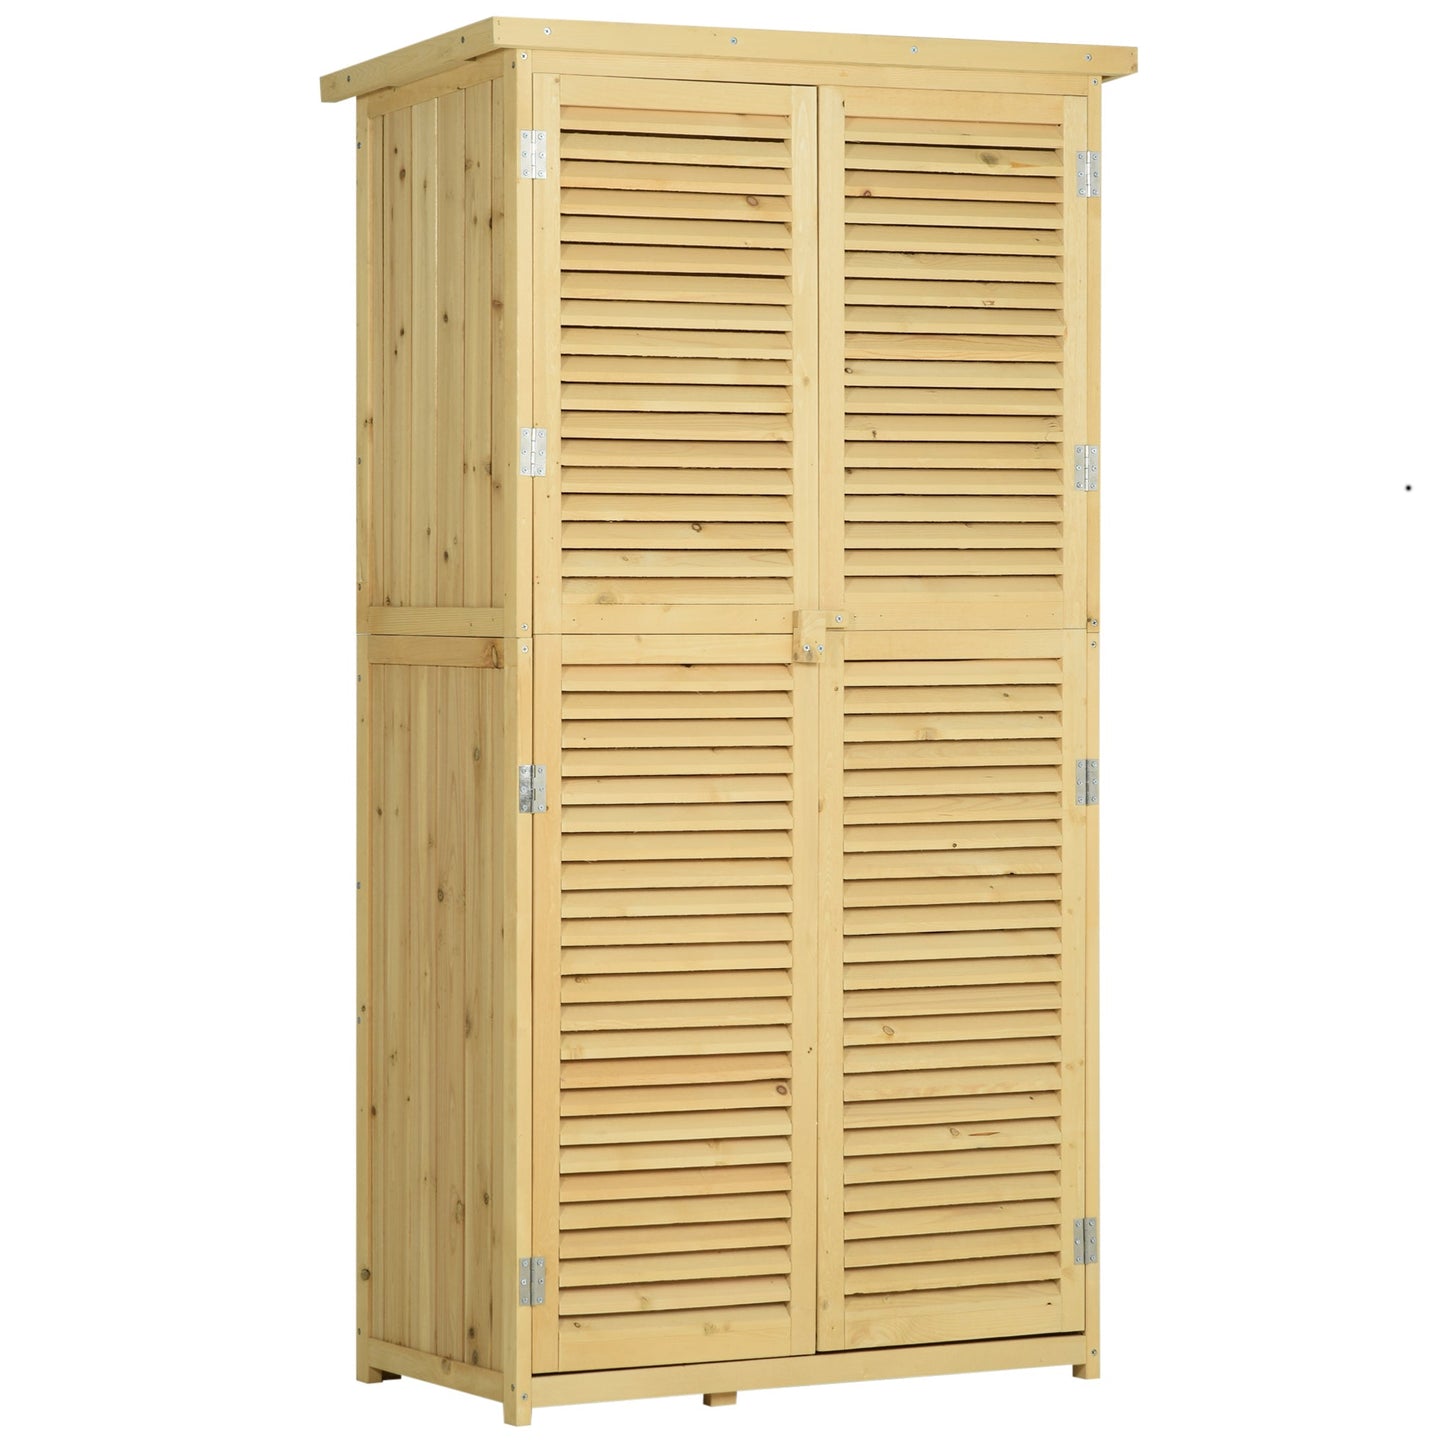 Outdoor and Garden-3' x 5' Wooden Garden Storage Shed, Sheds & Outdoor Storage with Asphalt Roof & 2 Large Wood Doors with Lock, Natural - Outdoor Style Company